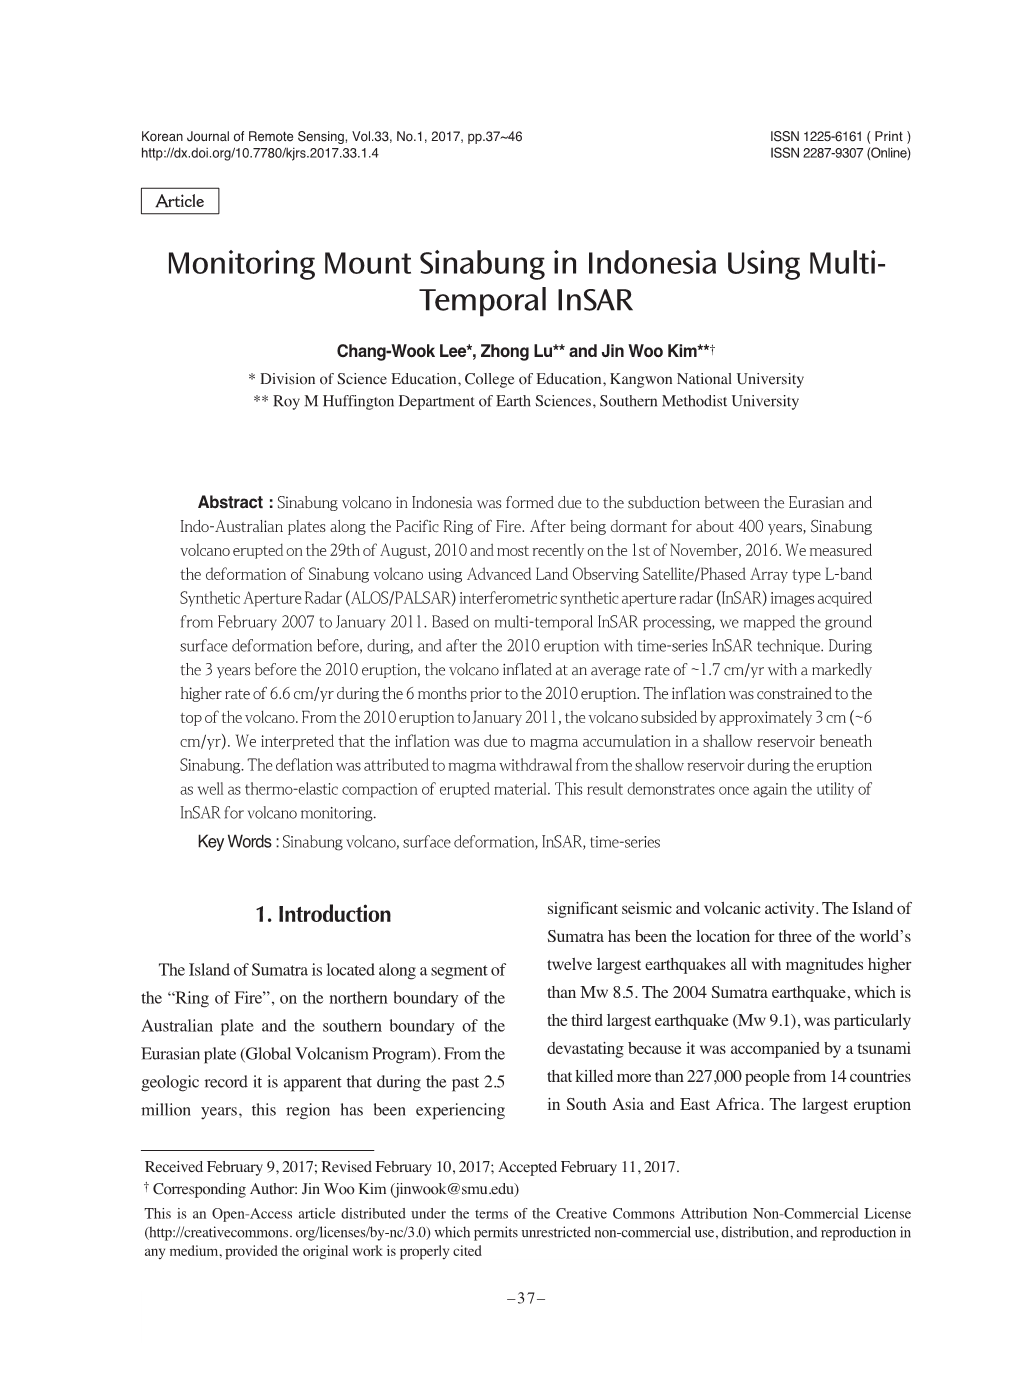 Monitoring Mount Sinabung in Indonesia Using Multi- Temporal Insar